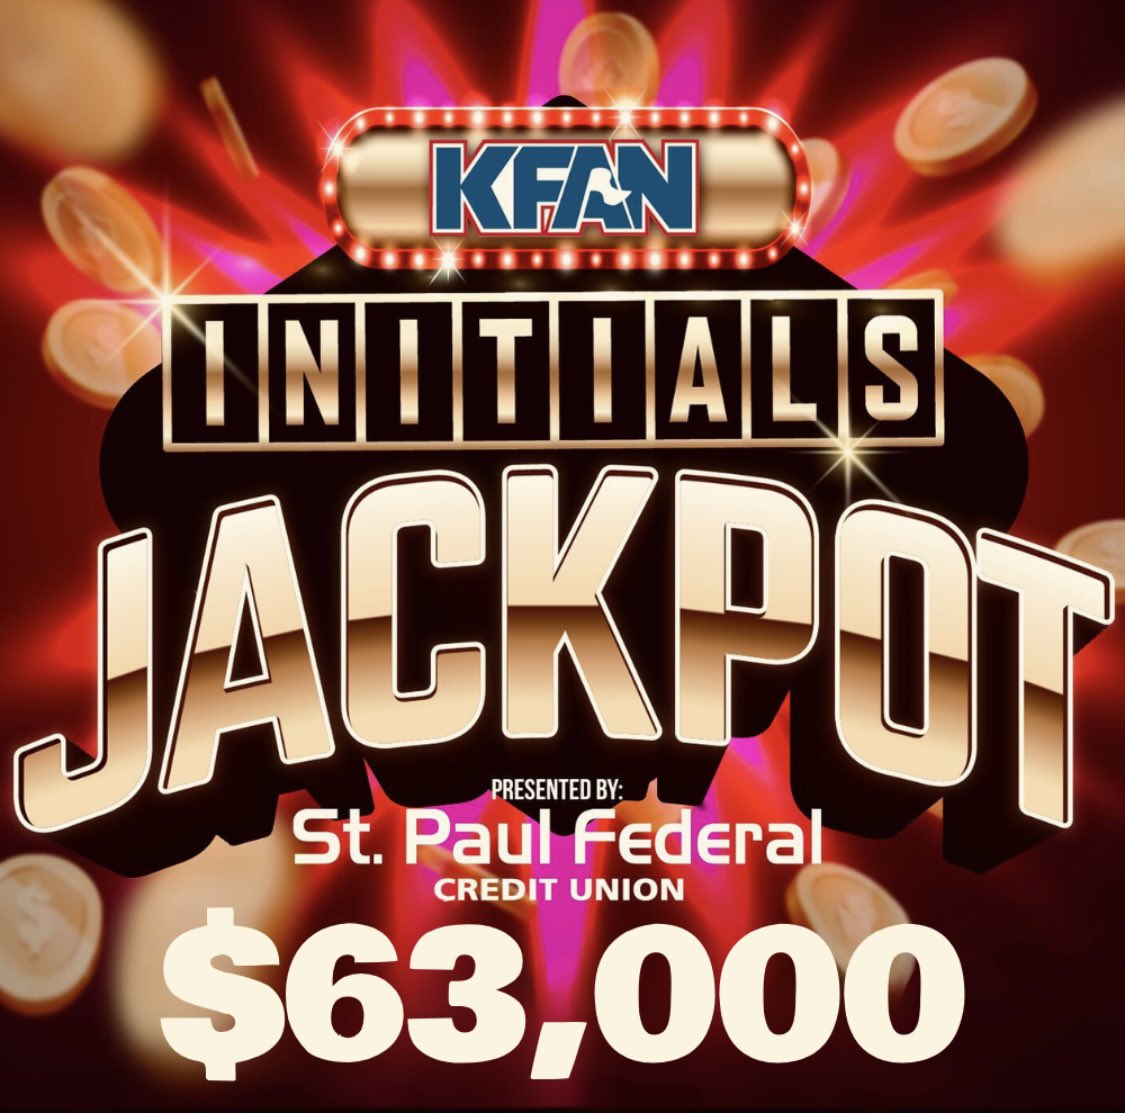 TODAY: The first ever ALL RUBE game of @InitialsGame on the @PowerTripKFAN. The winner advances to take on the @PowerTripKFAN members tomorrow at 8:15. Tune in now: LISTEN: KFAN.com/listen